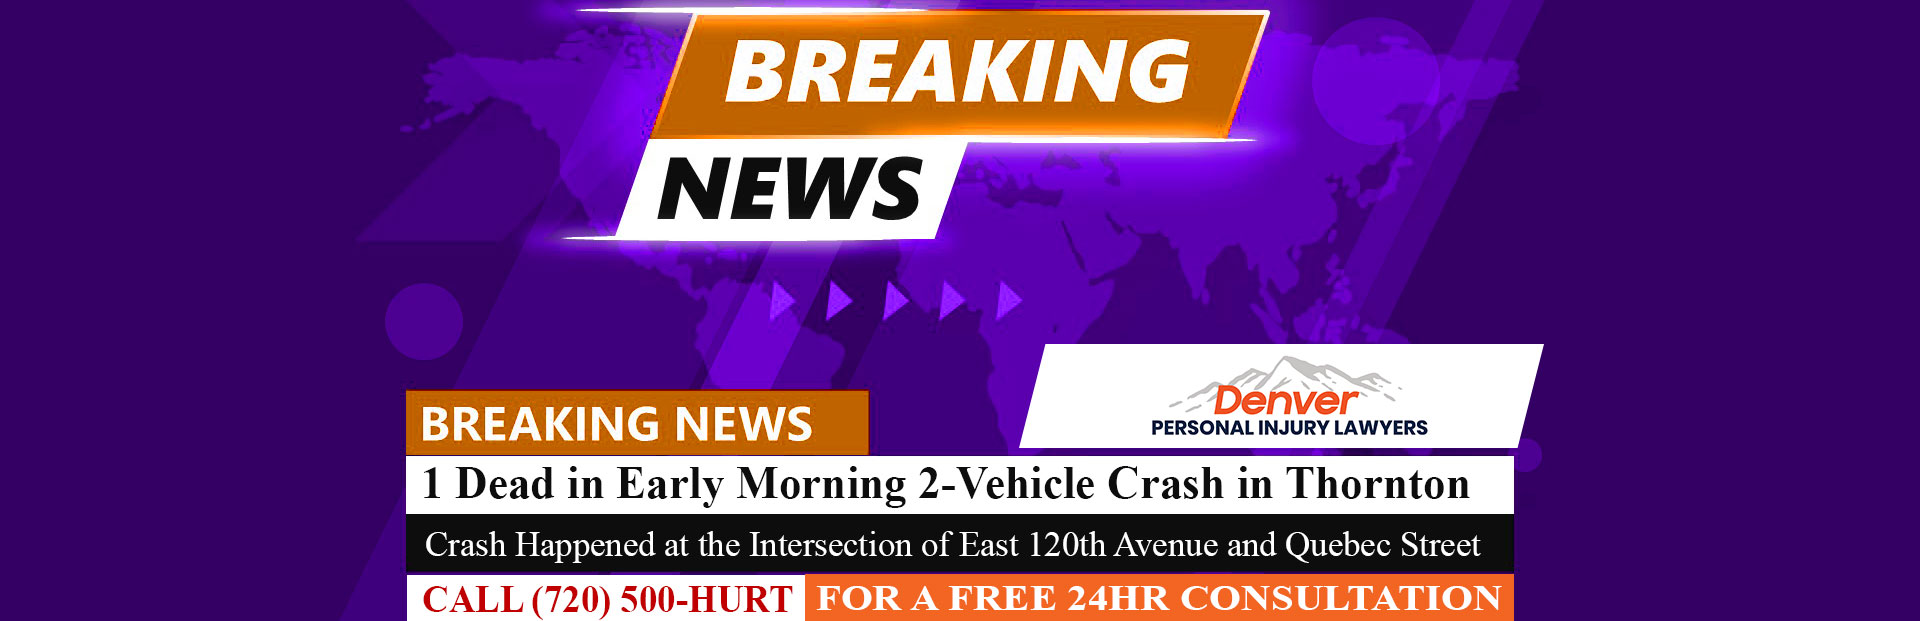 [10-10-22] 1 Dead in Early Morning 2-Vehicle Crash in Thornton